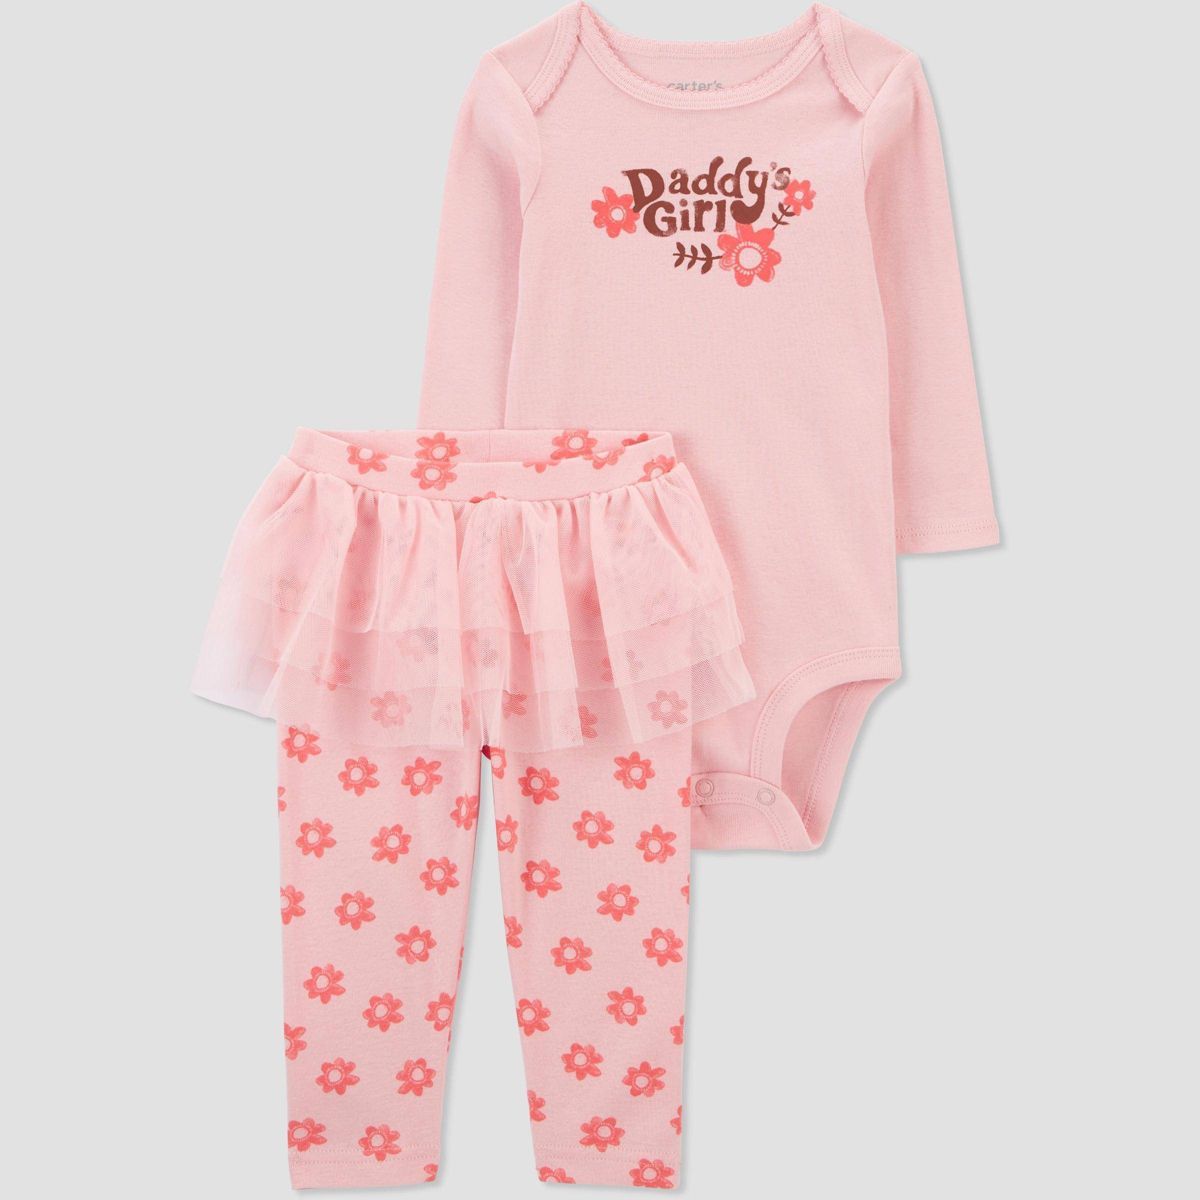 Carter's Just One You®️ Baby 2pc Daddy's Girl Top & Bottom Set - Pink | Target